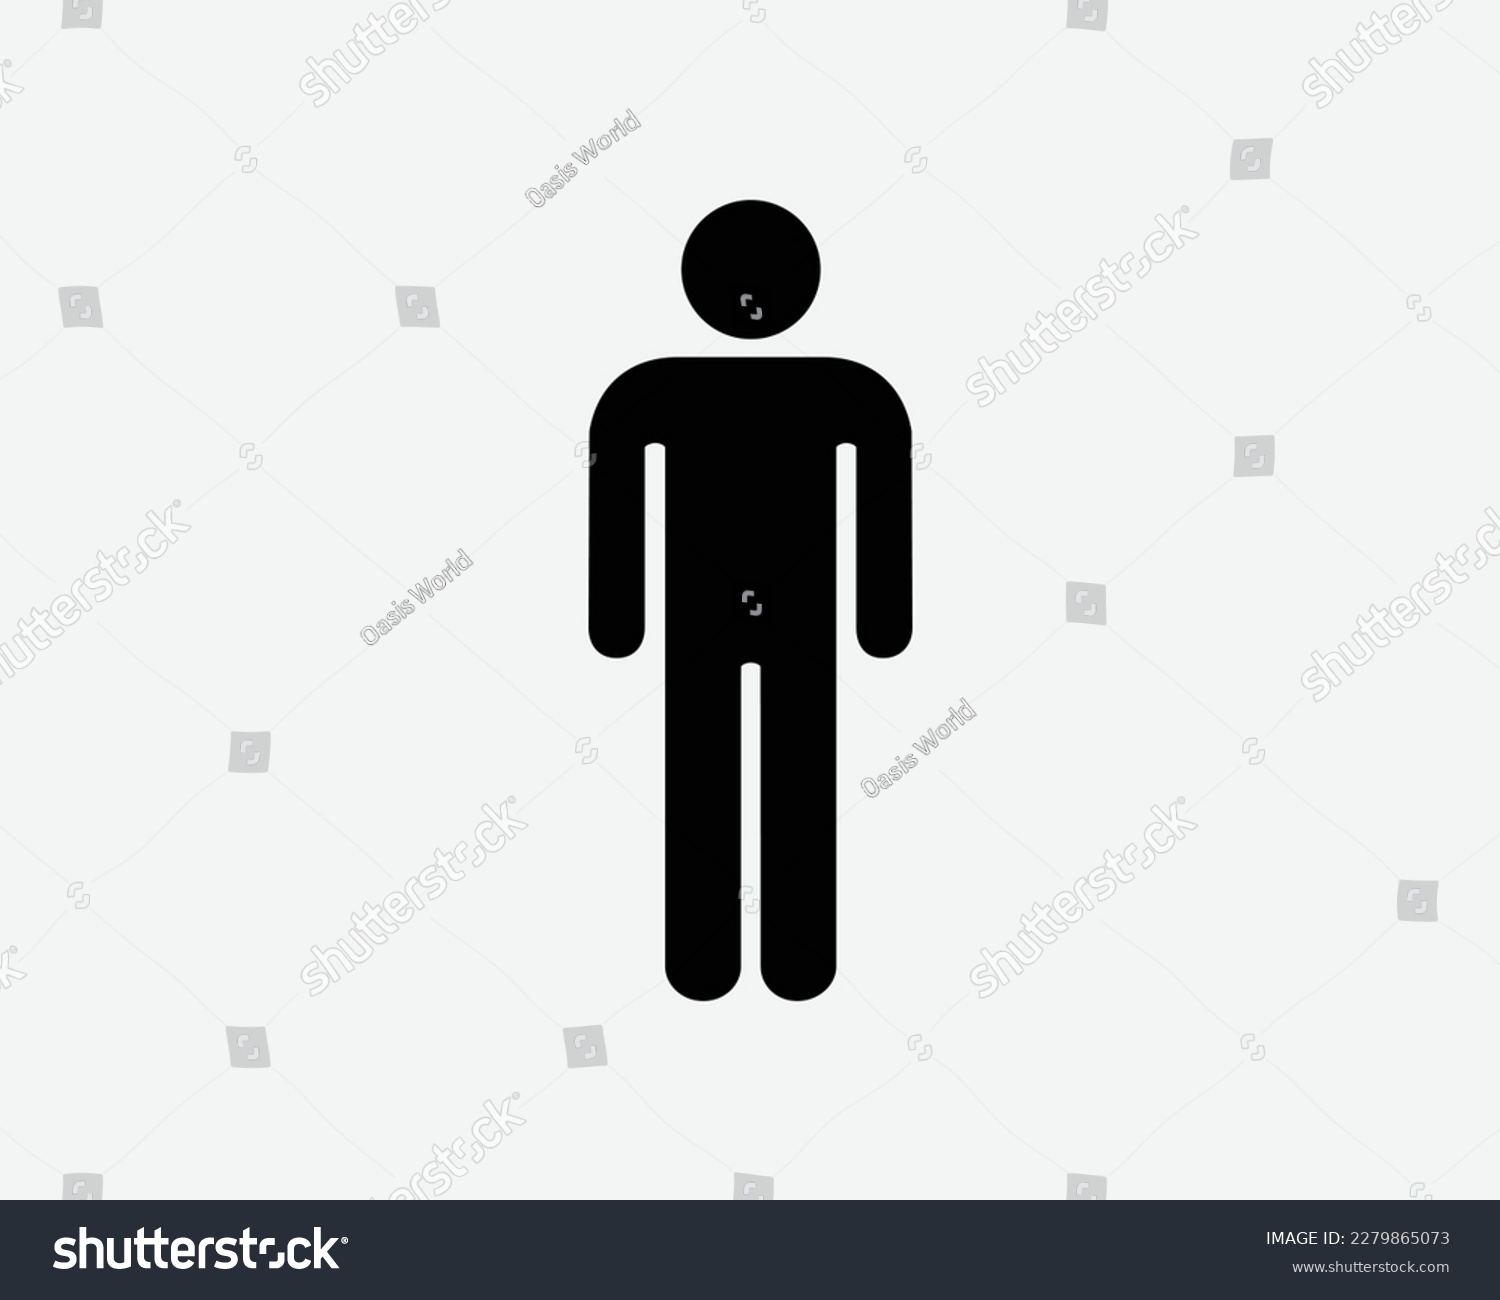 SVG of Stick Figure Man Person Stand Standing Single Pedestrian Black White Silhouette Sign Symbol Icon Vector Graphic Clipart Illustration Artwork Pictogram svg